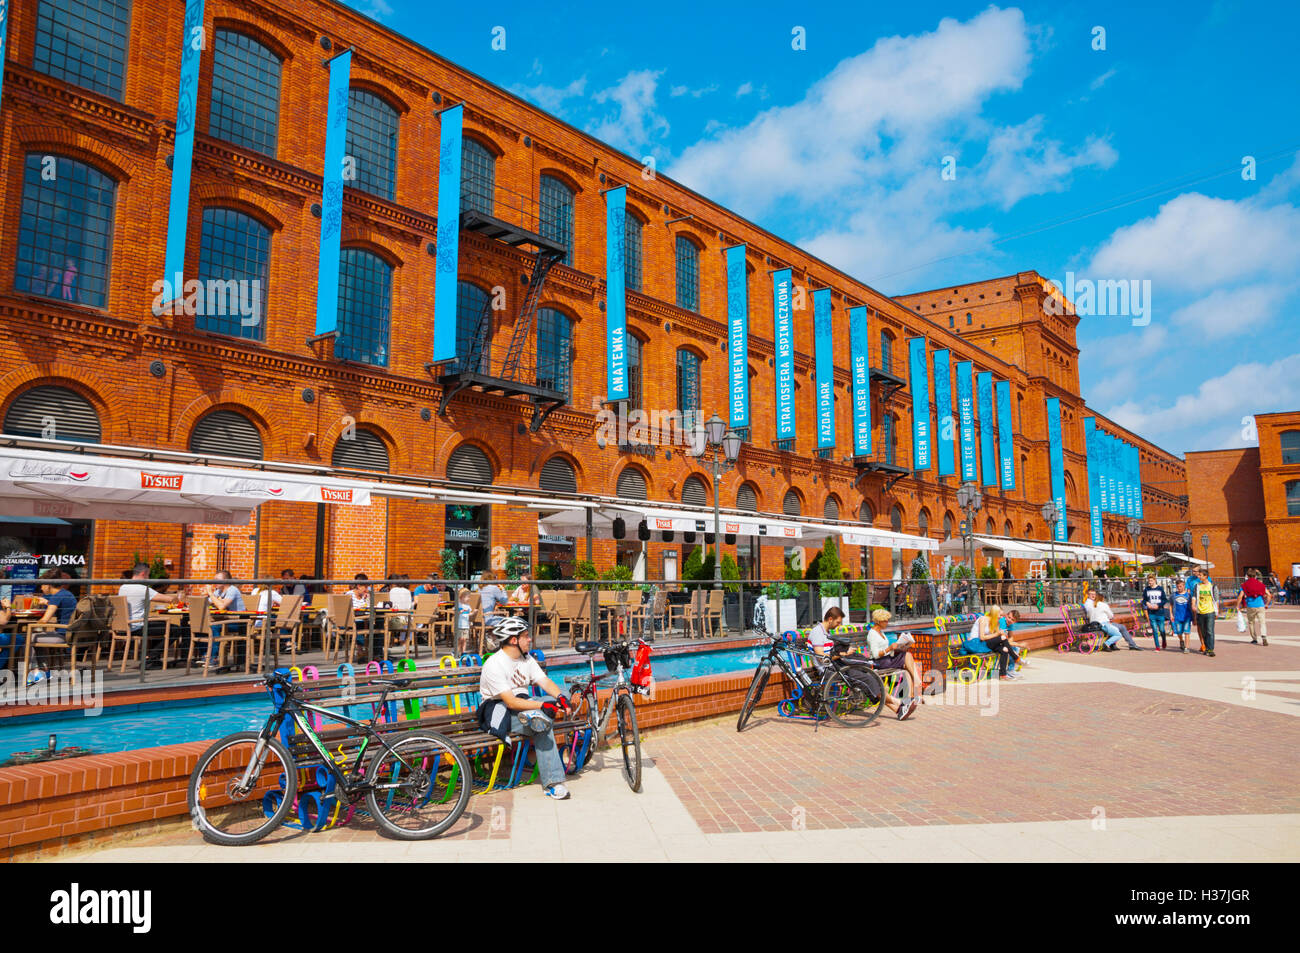 Lodz High Resolution Stock Photography and Images - Alamy